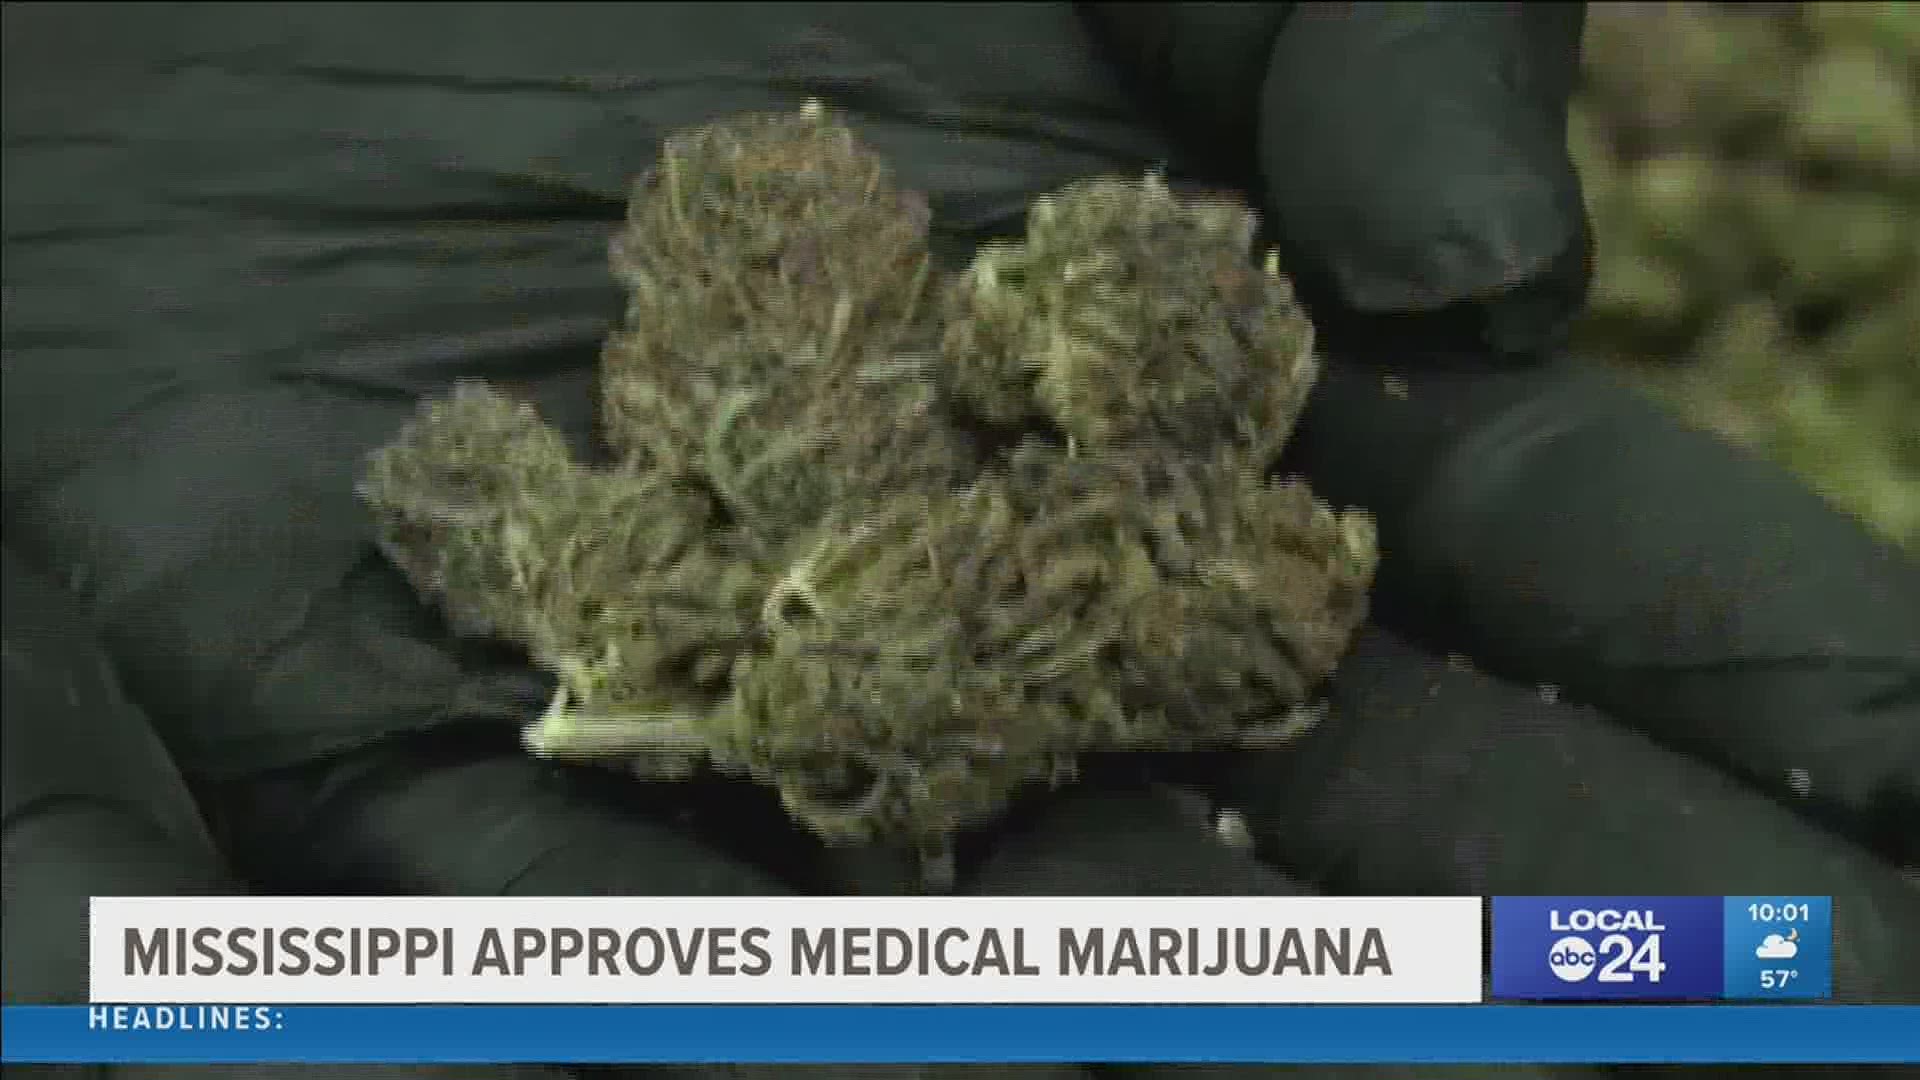 The next step for medical marijuana in Mississippi is for the department of health to put forth regulations.